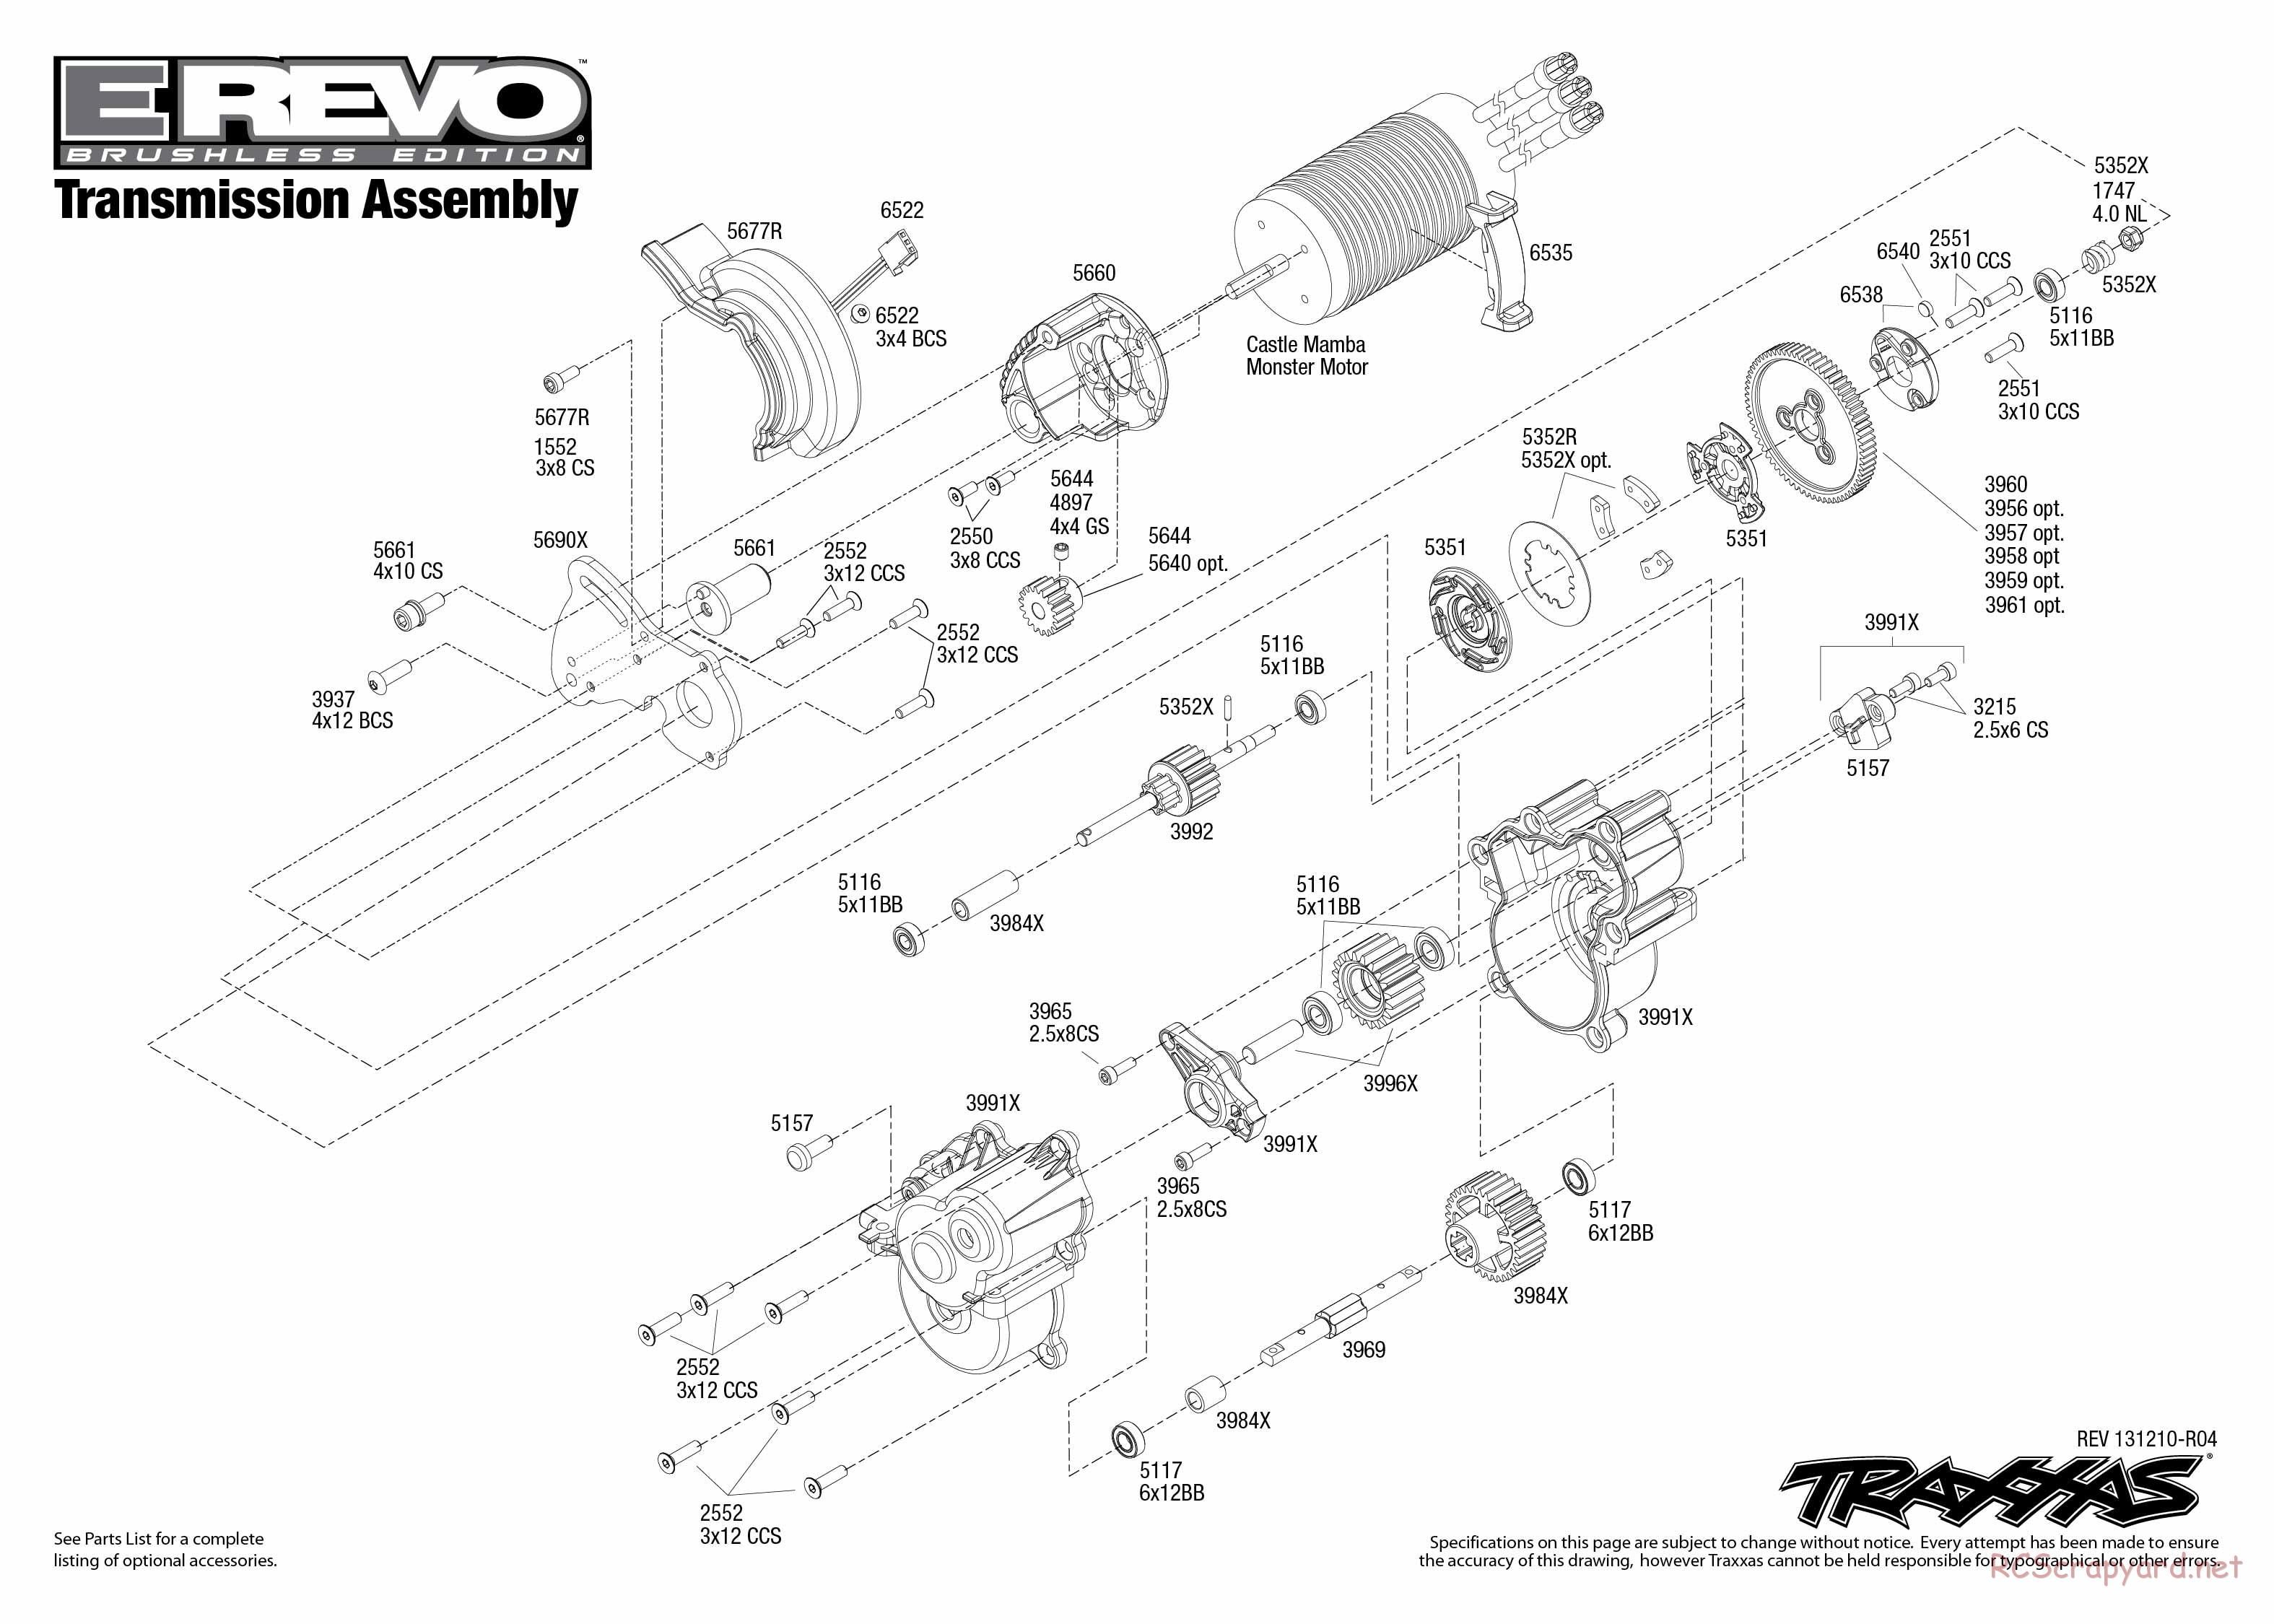 Traxxas - E-Revo Brushless (2009) - Exploded Views - Page 4